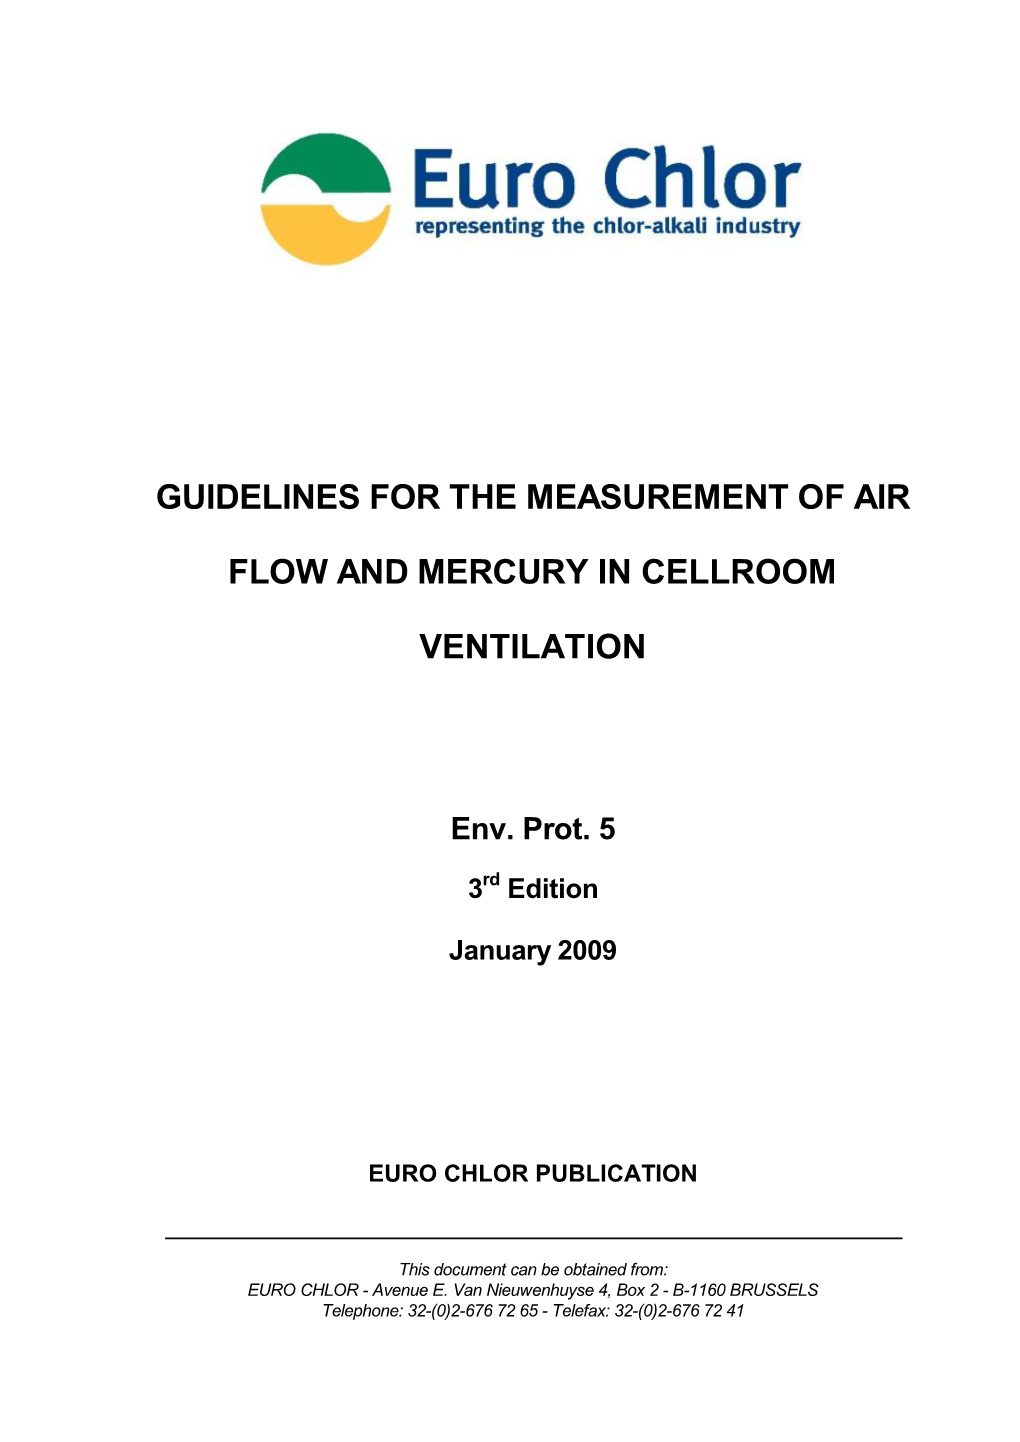 Guidelines for the Measurement of Air Flow and Mercury in Cellroom